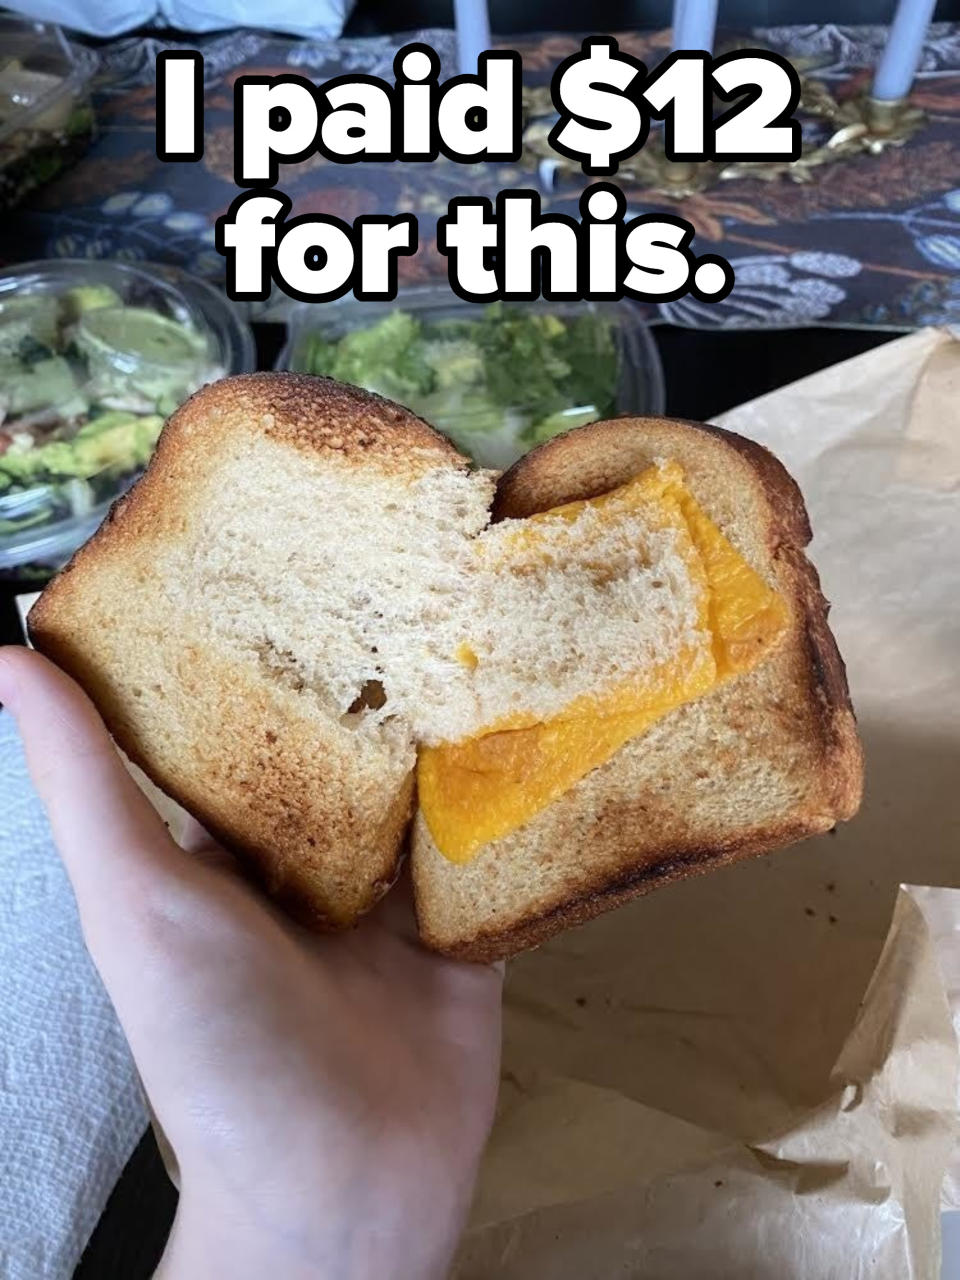 A &quot;grilled cheese&quot; with just a thin slice of overcooked American cheese with the caption &quot;I paid $12 for this&quot;